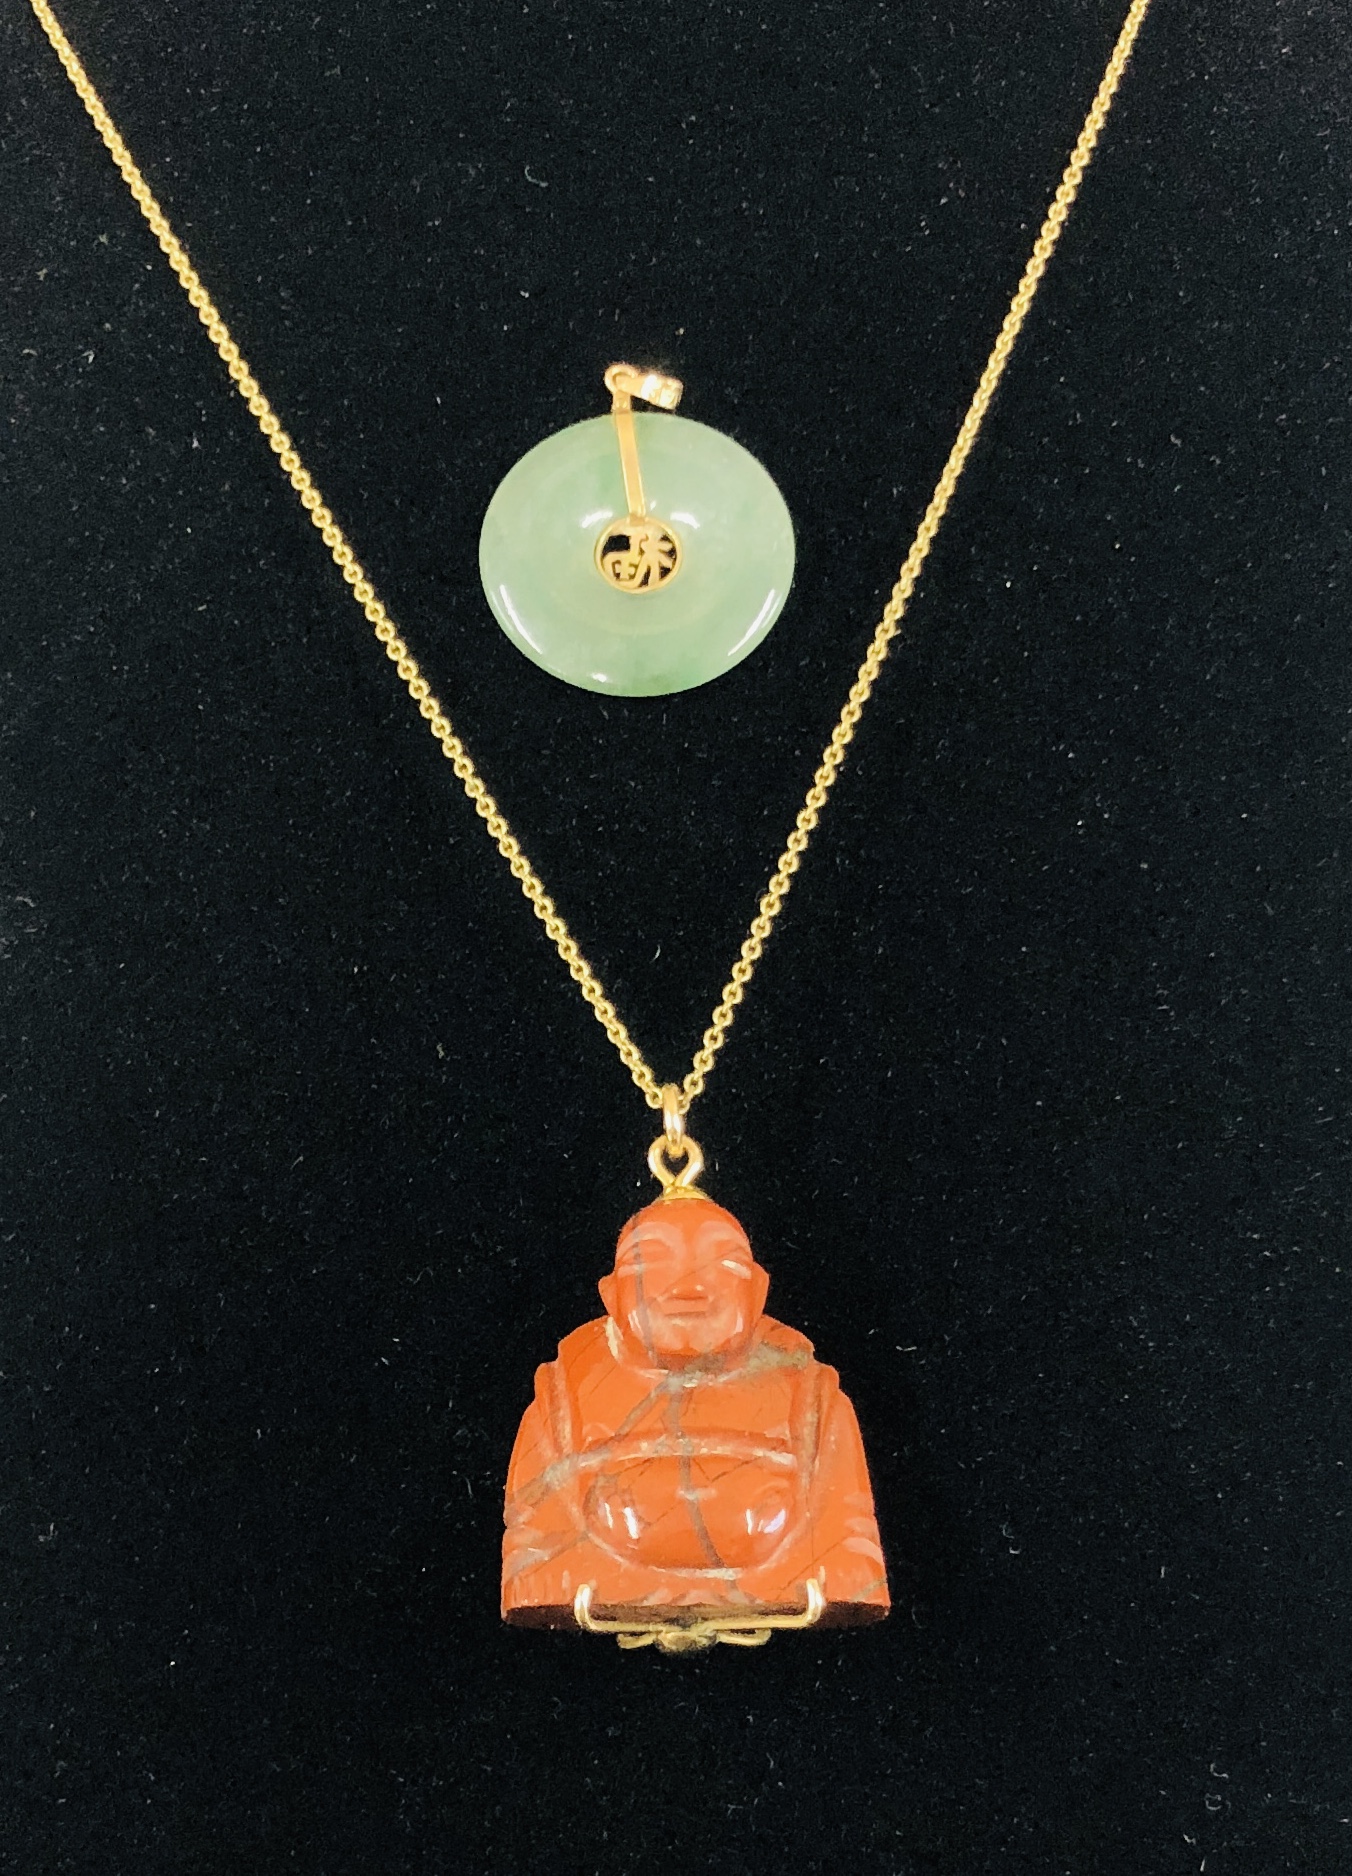 A JADE PENDANT MARKED 585 TO THE BACK ALONG WITH BUDDHA PENDANT.